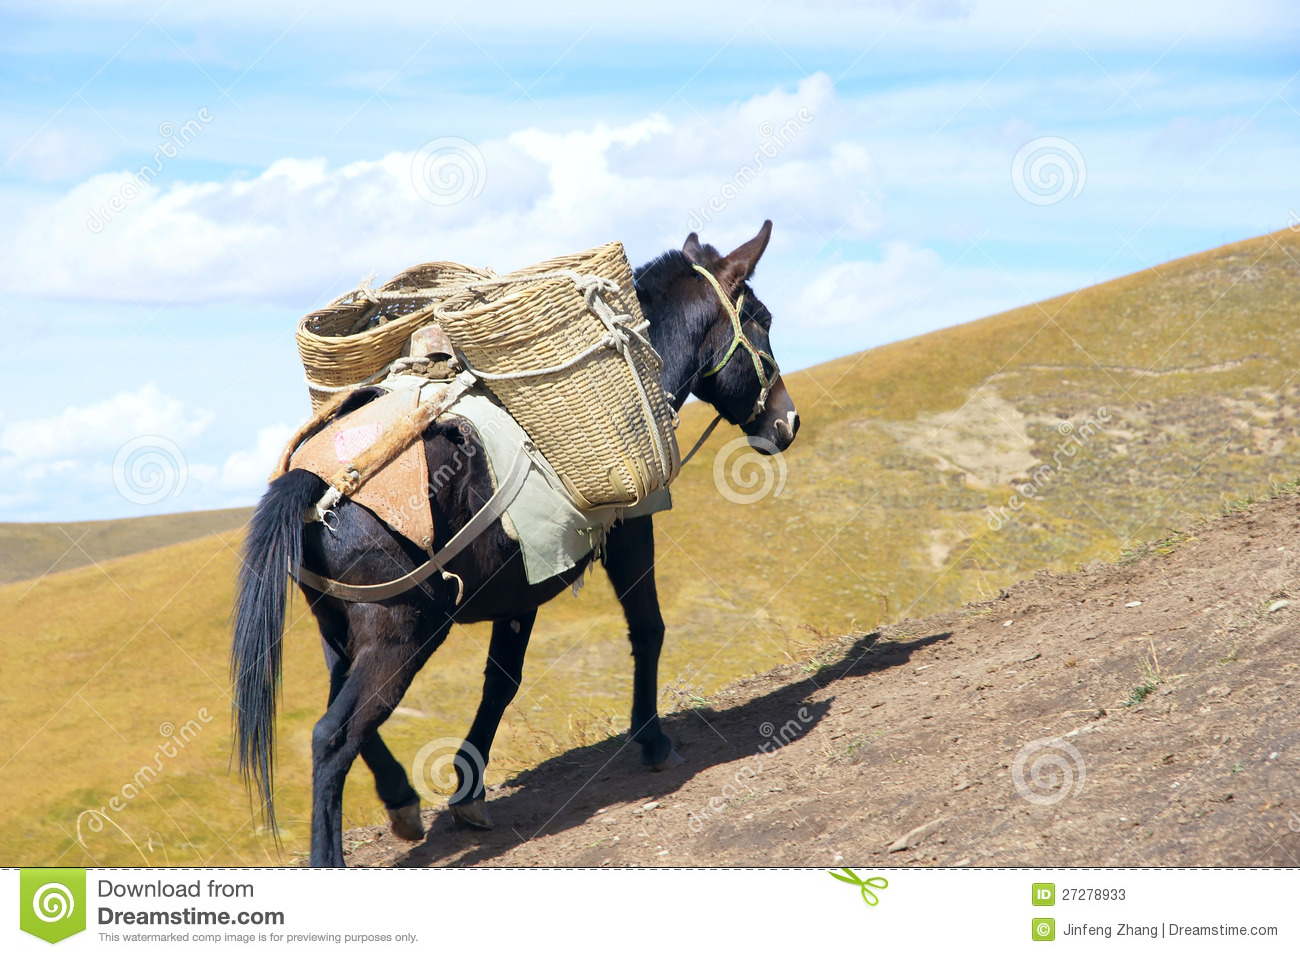 The Horse Is Carrying Goods In Ruoergai Mountains In Sichuan China 